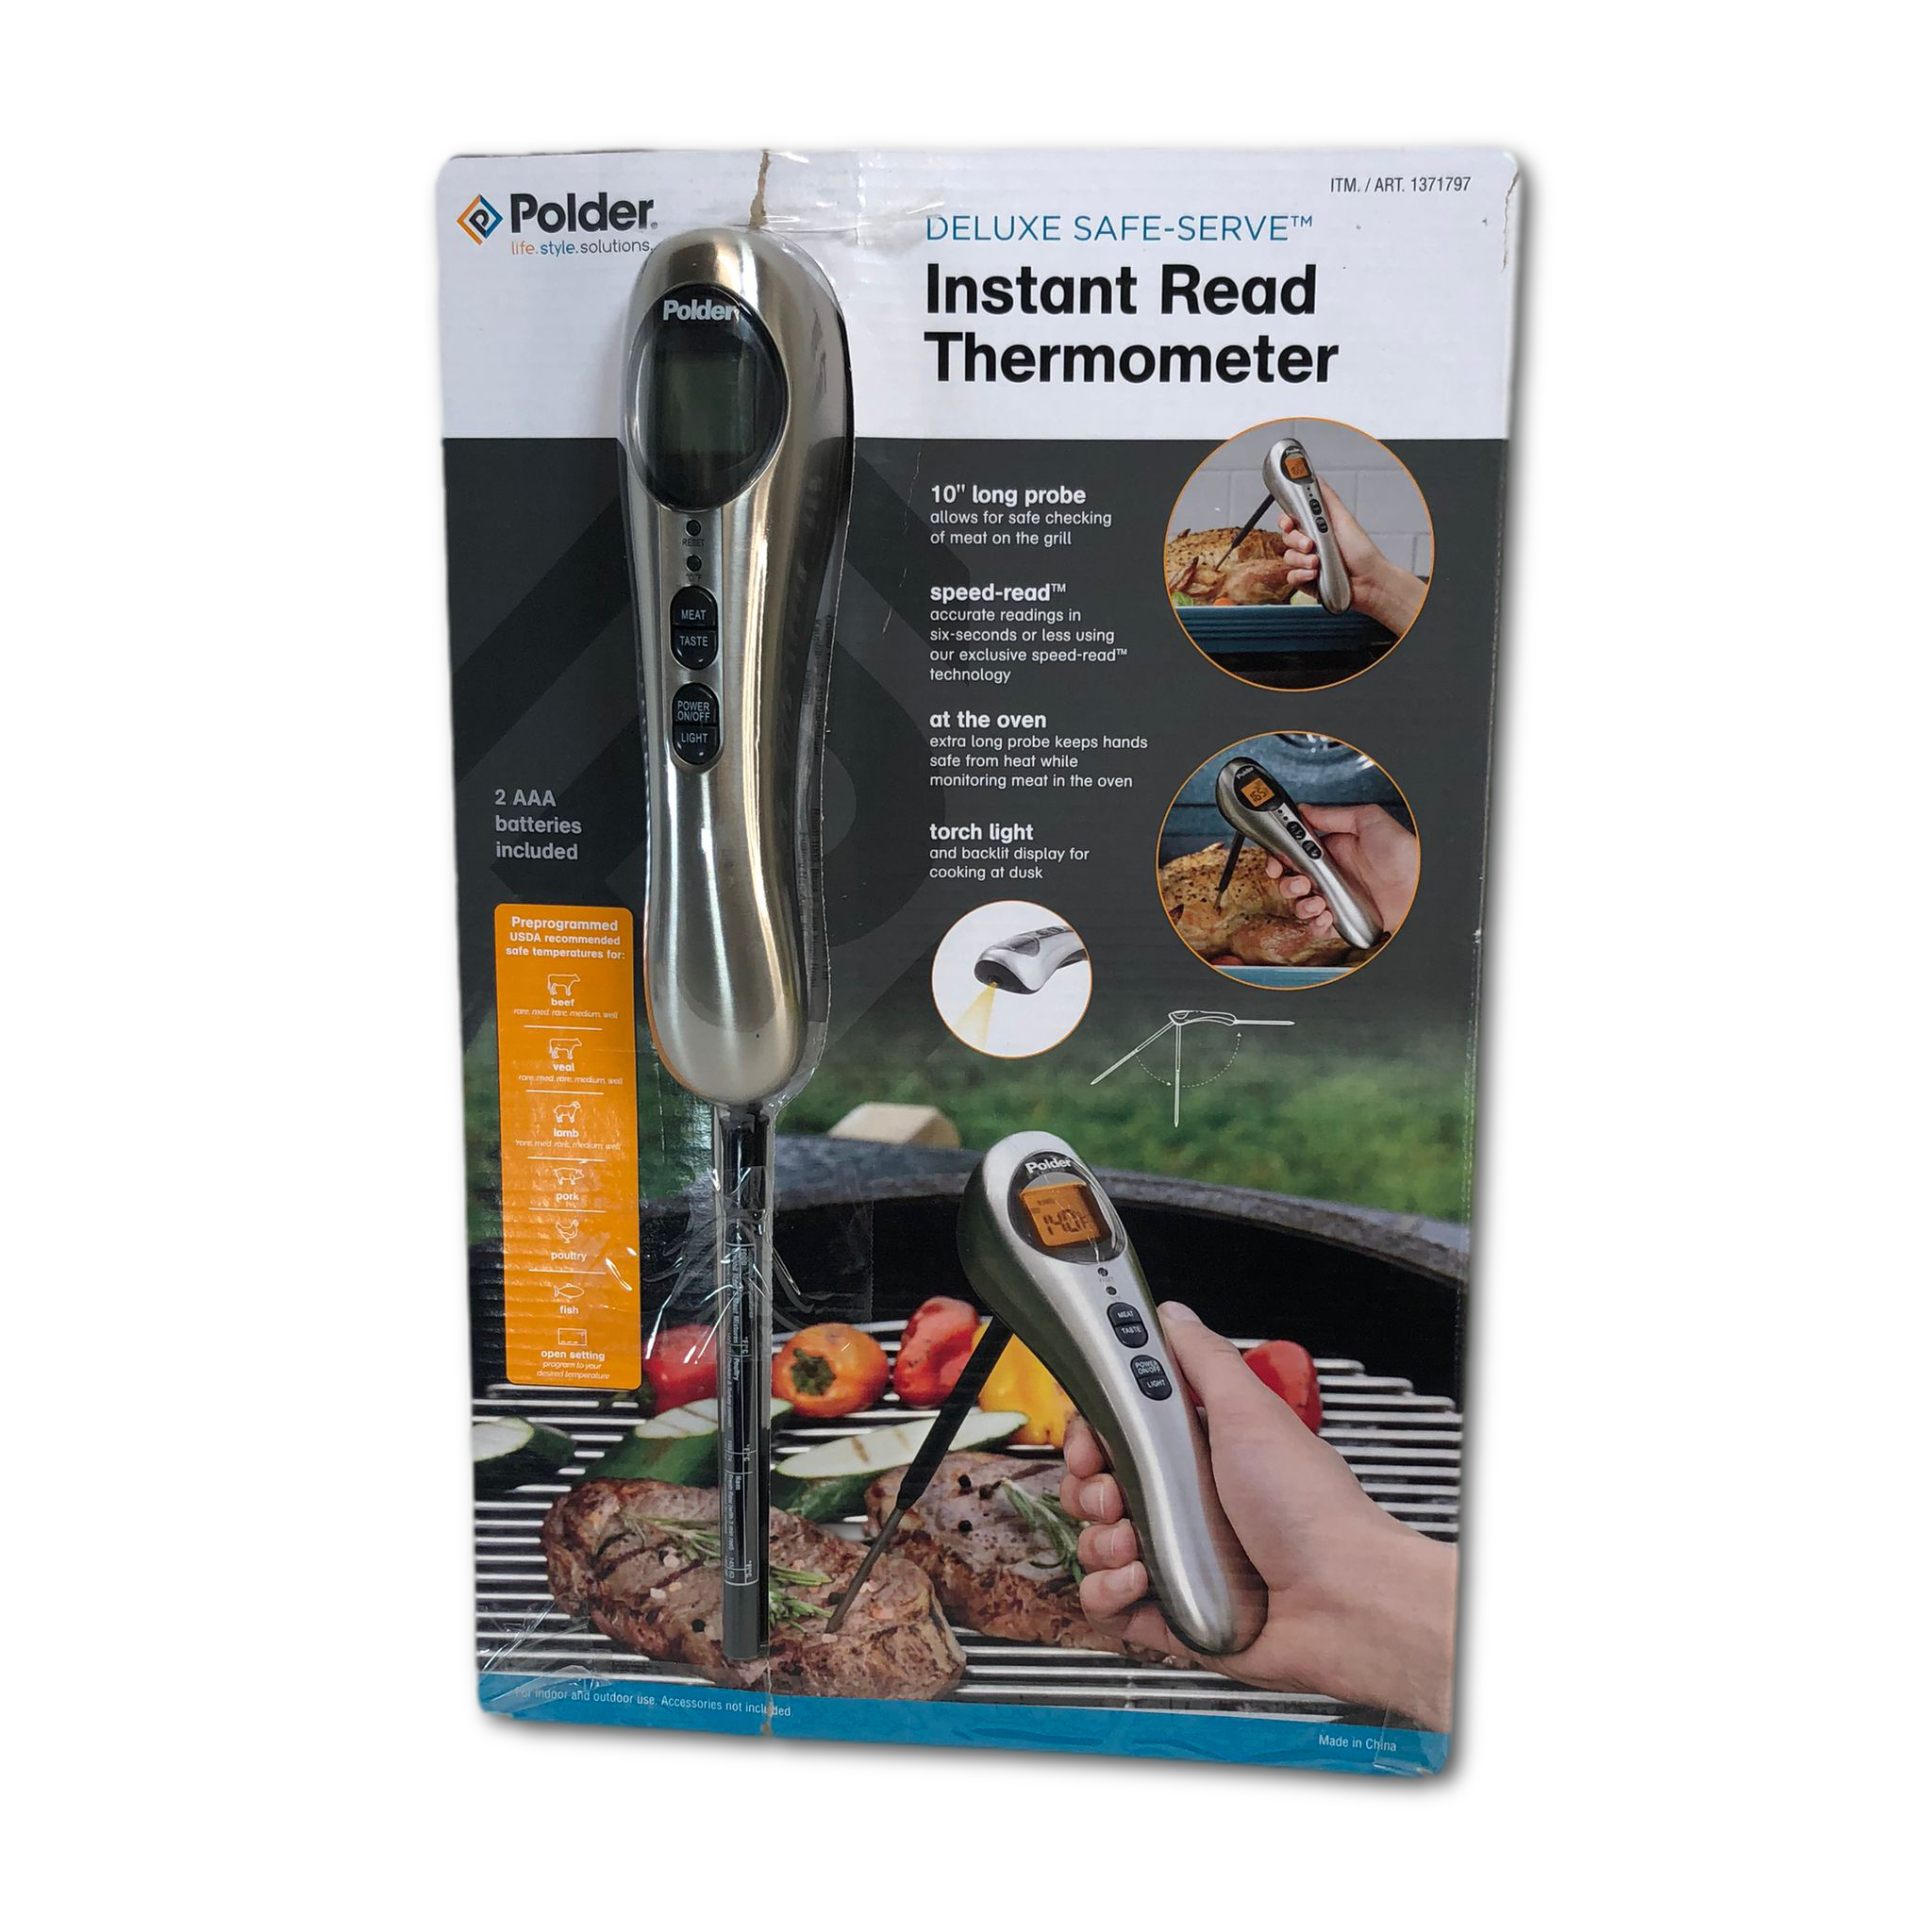 As is Polder Deluxe Safe-Serve Instant Read Thermometer